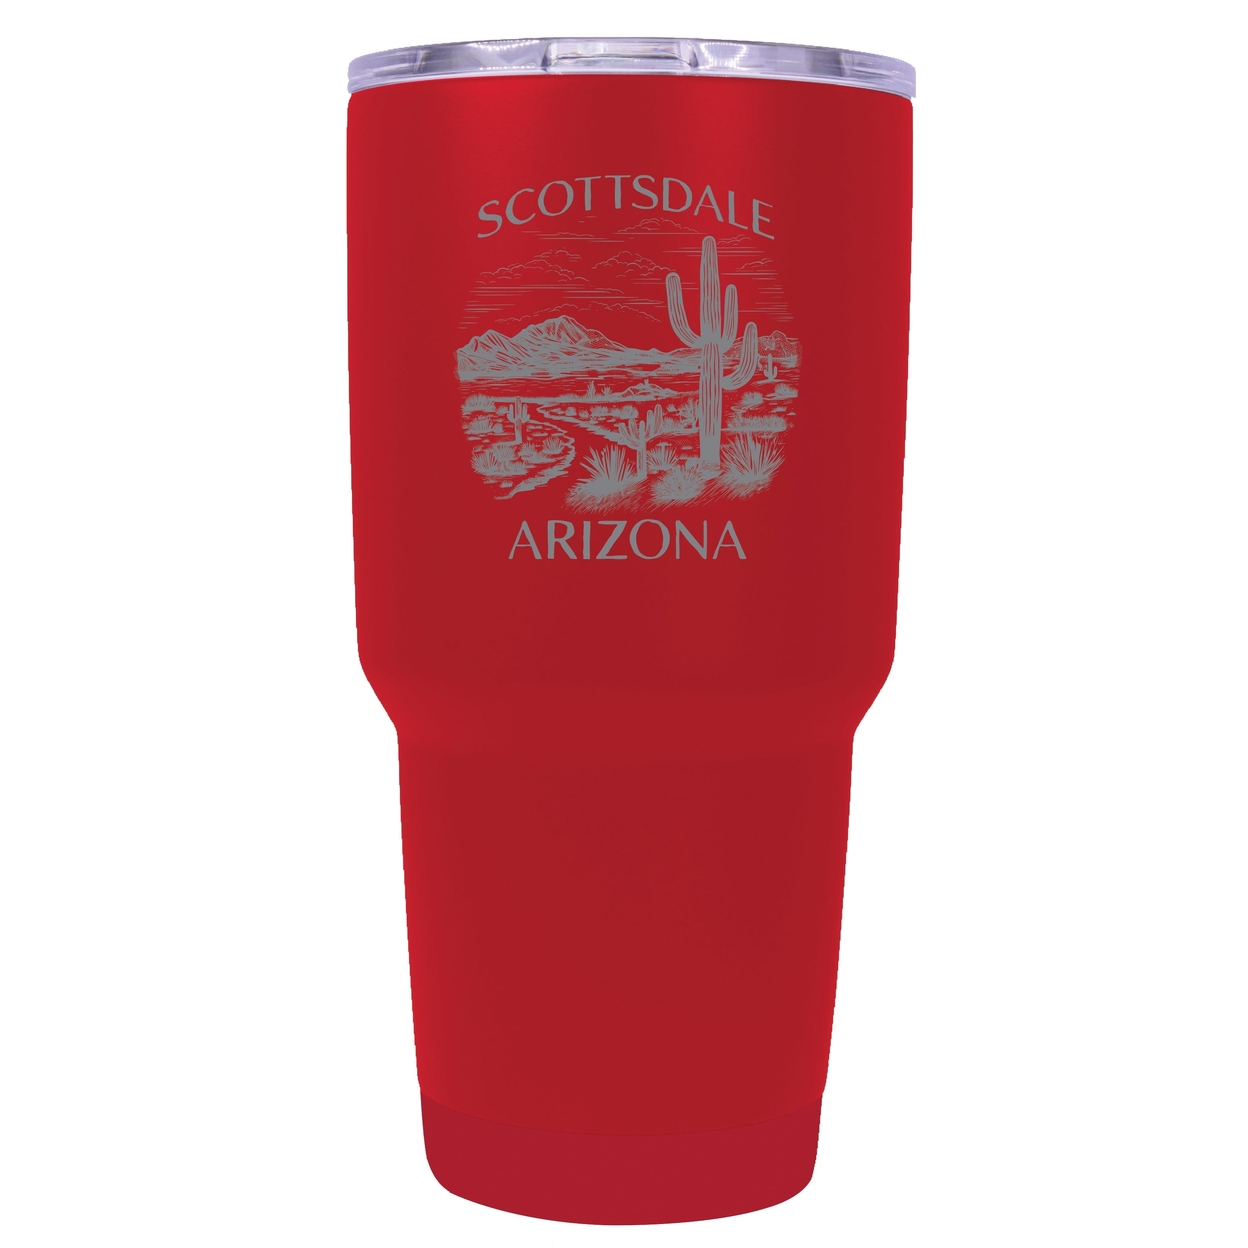 Scottsdale Arizona Souvenir 24 Oz Engraved Insulated Stainless Steel Tumbler - Red,,2-Pack